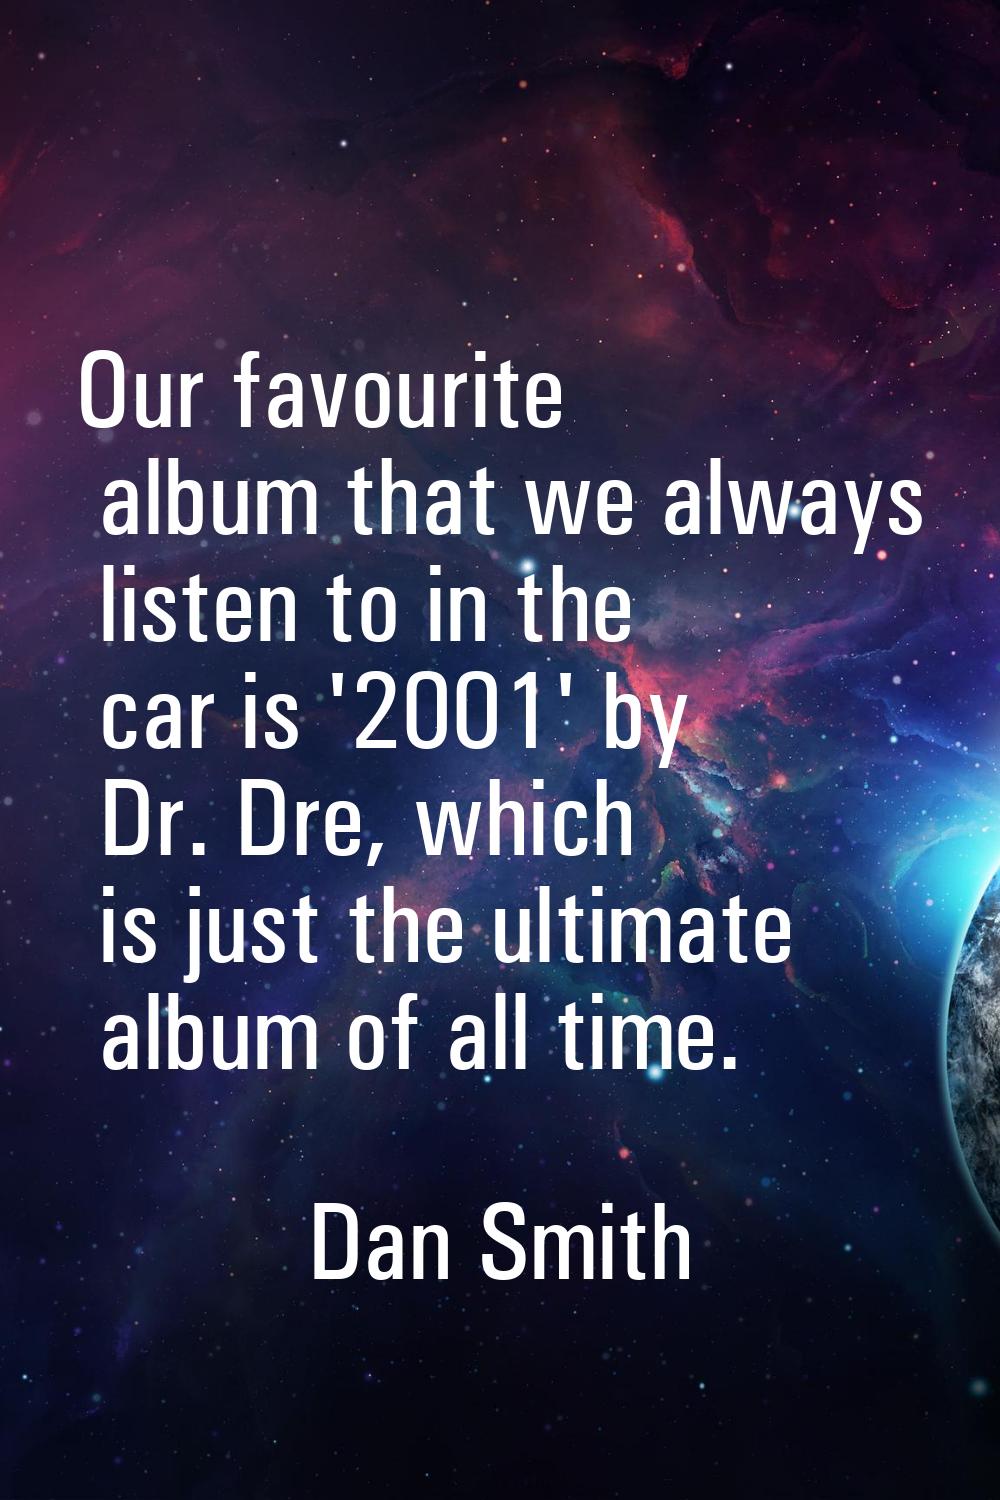 Our favourite album that we always listen to in the car is '2001' by Dr. Dre, which is just the ult